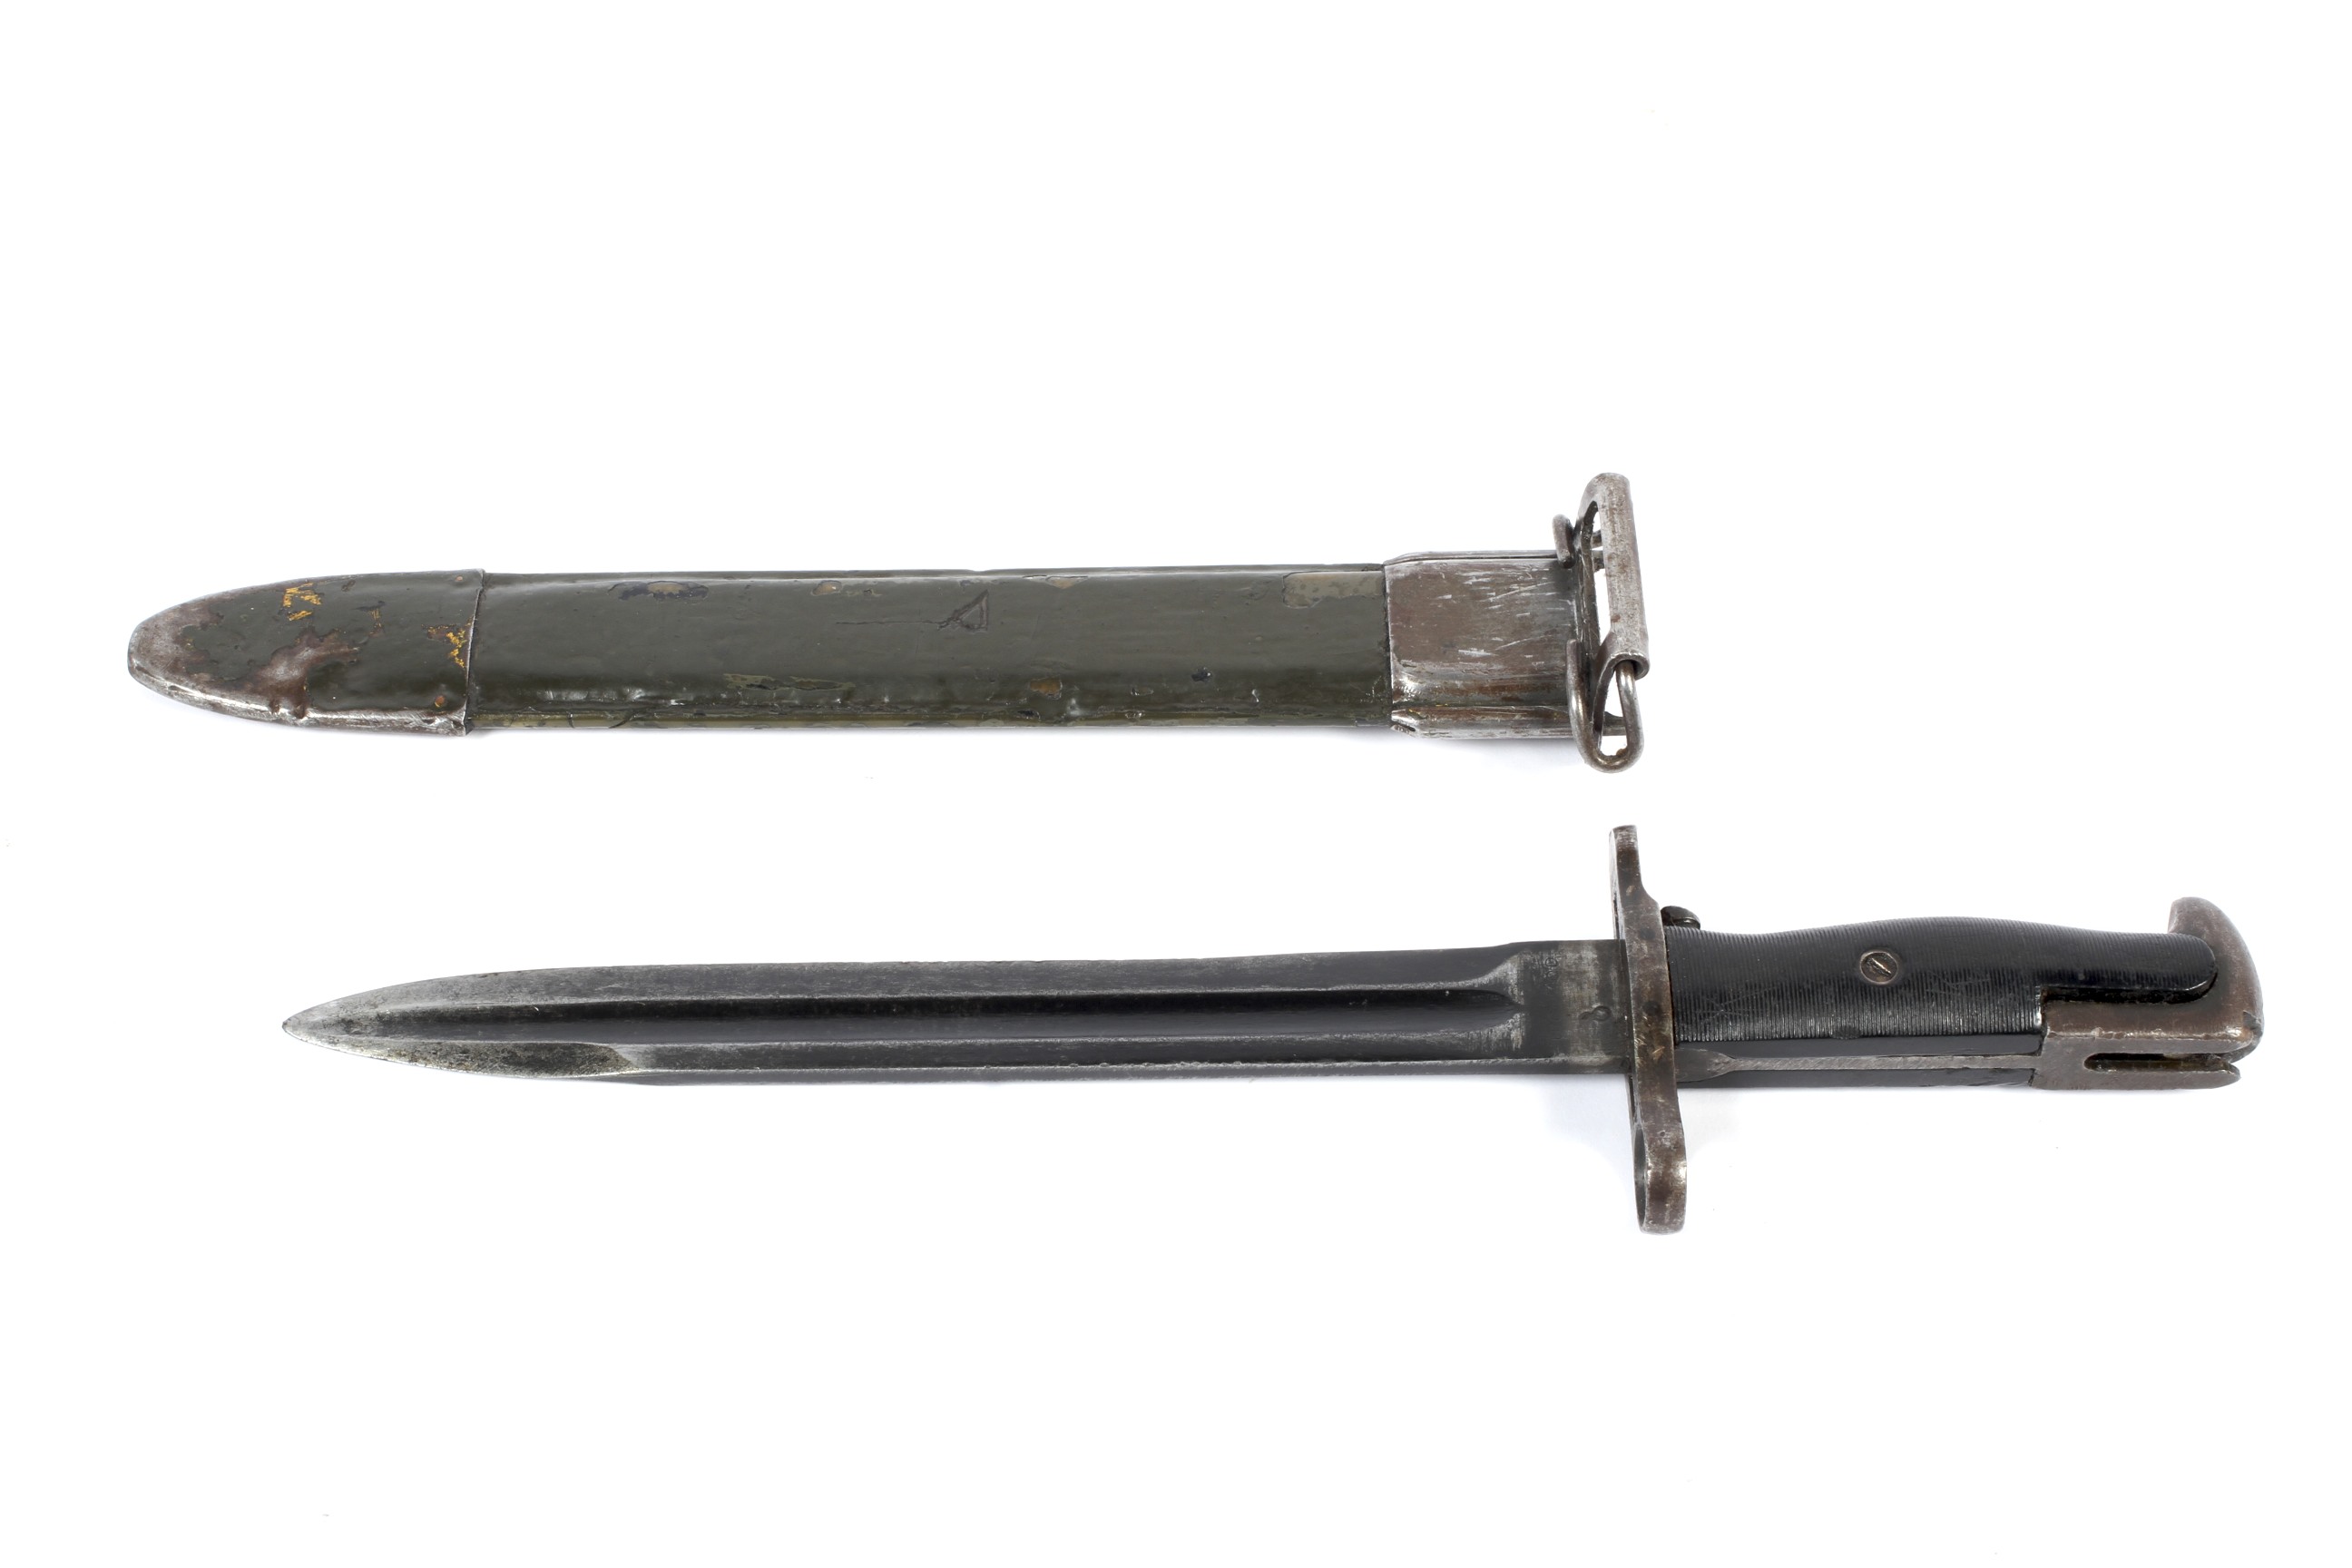 USA Army WWII issue bayonet. With scabba